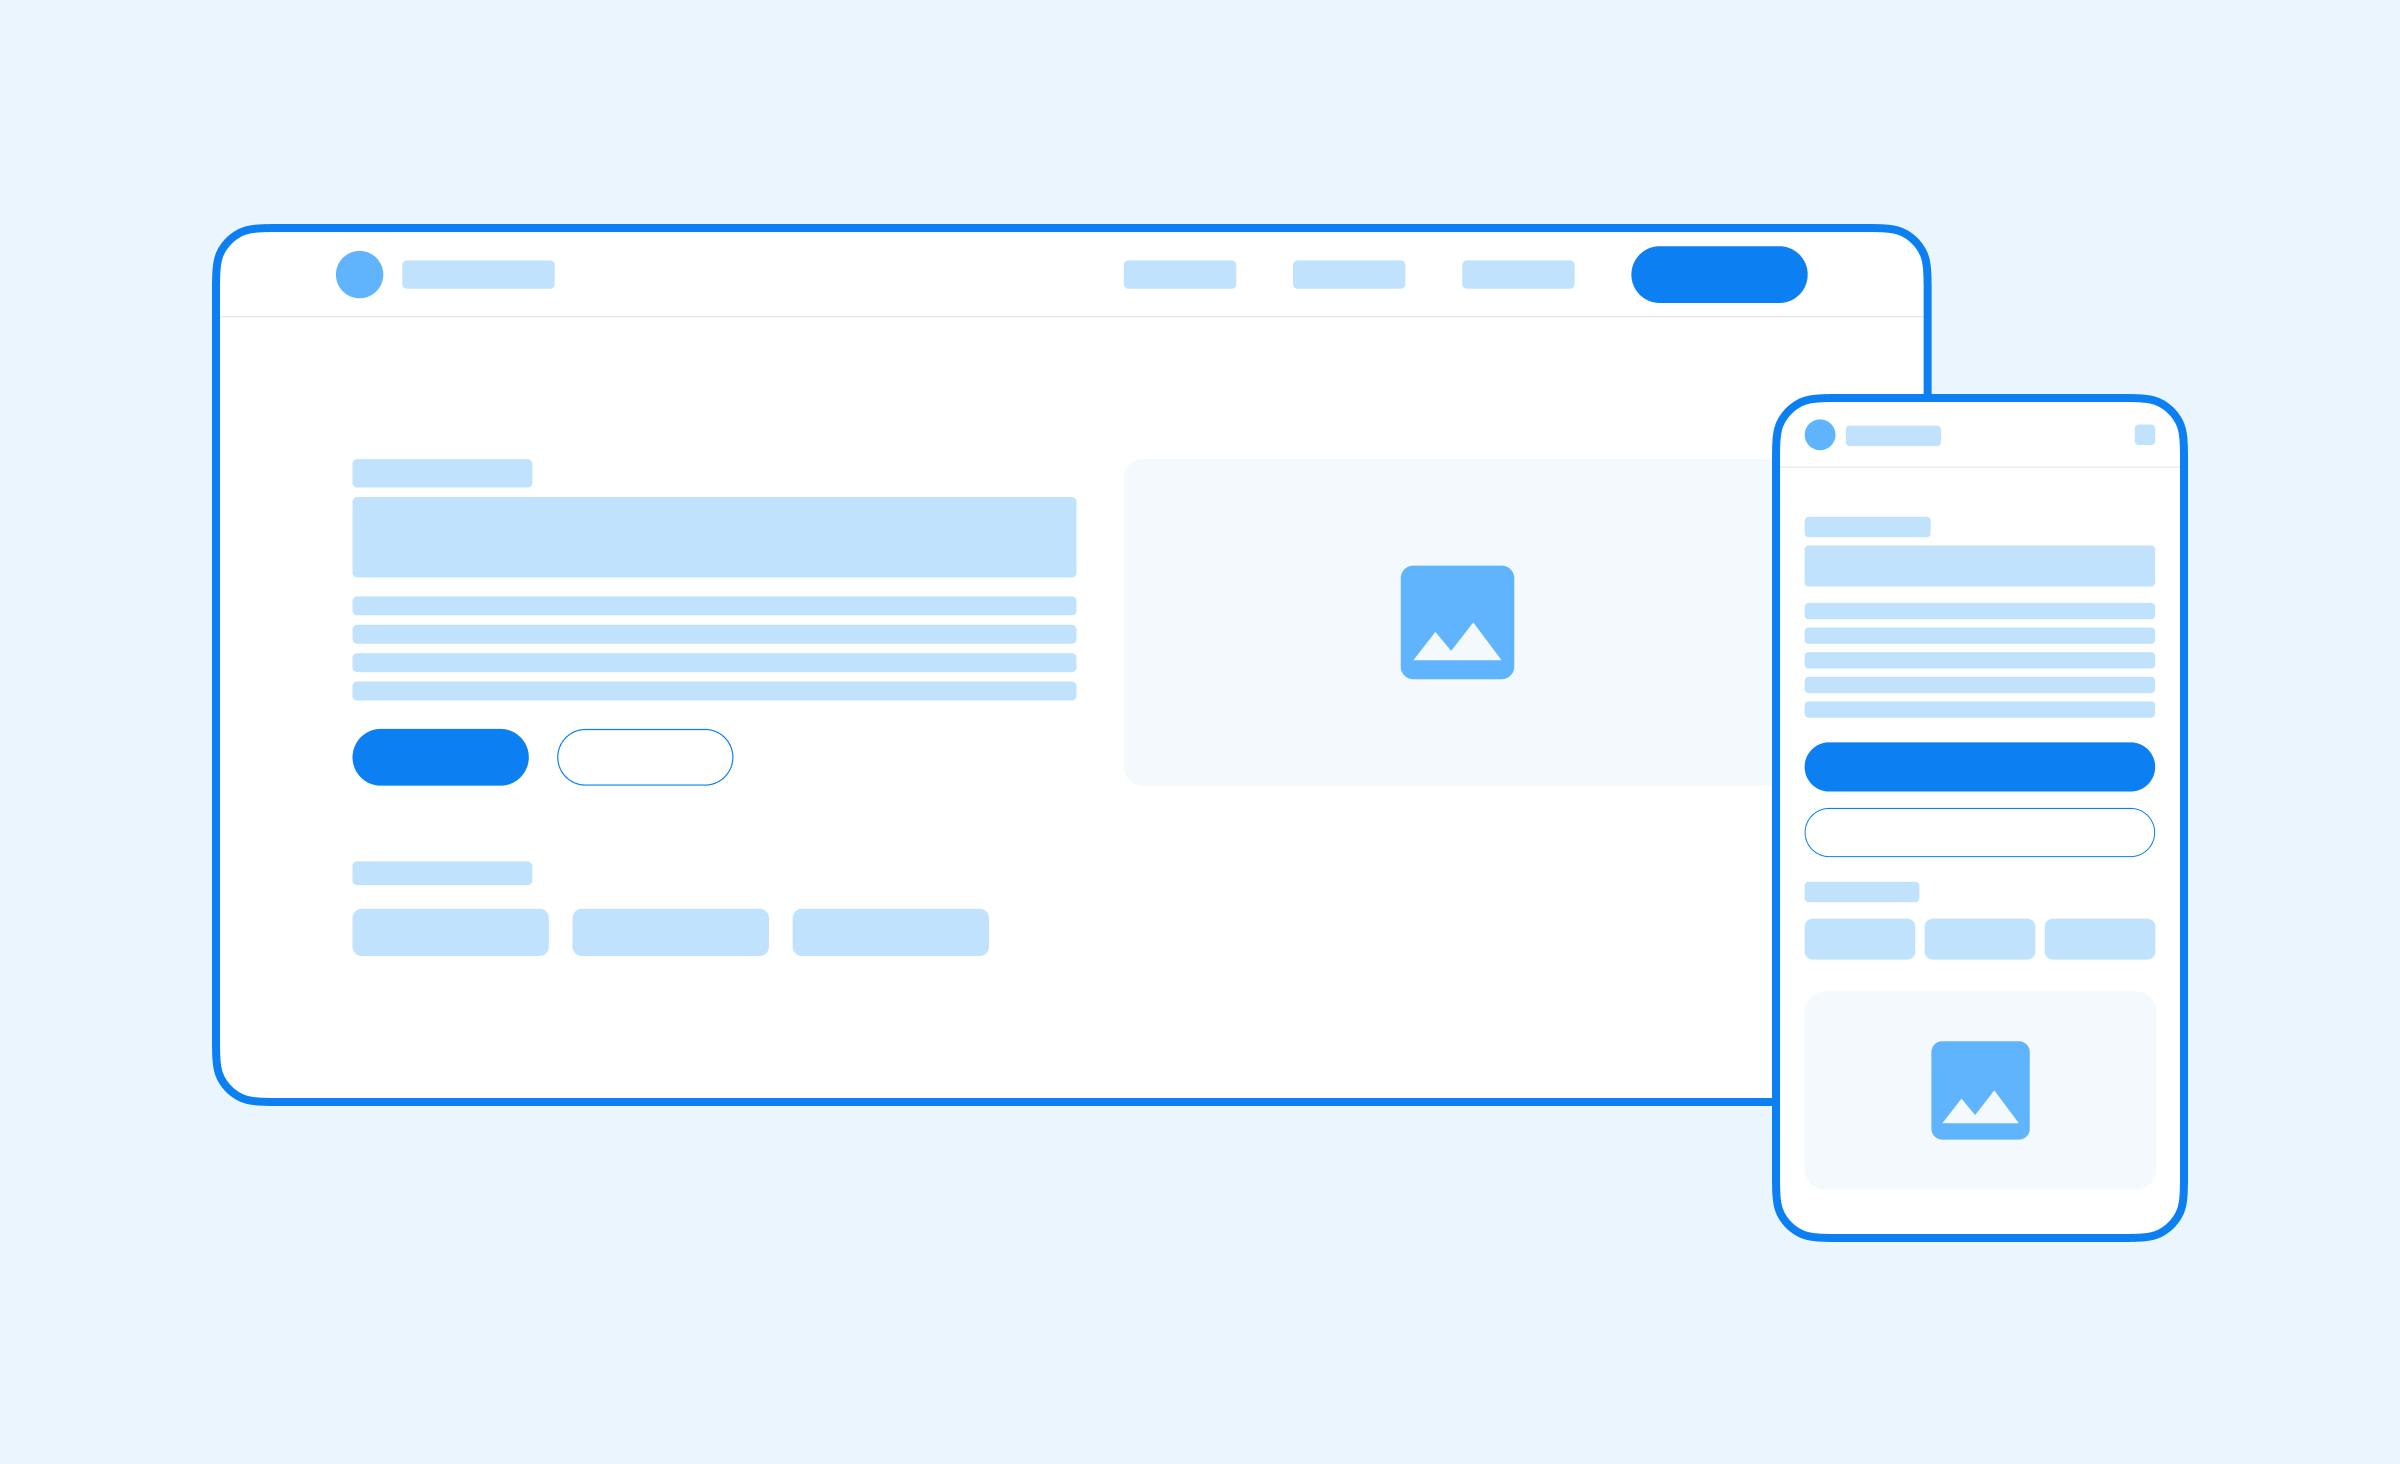 Banking app development: what wireframes usually look like